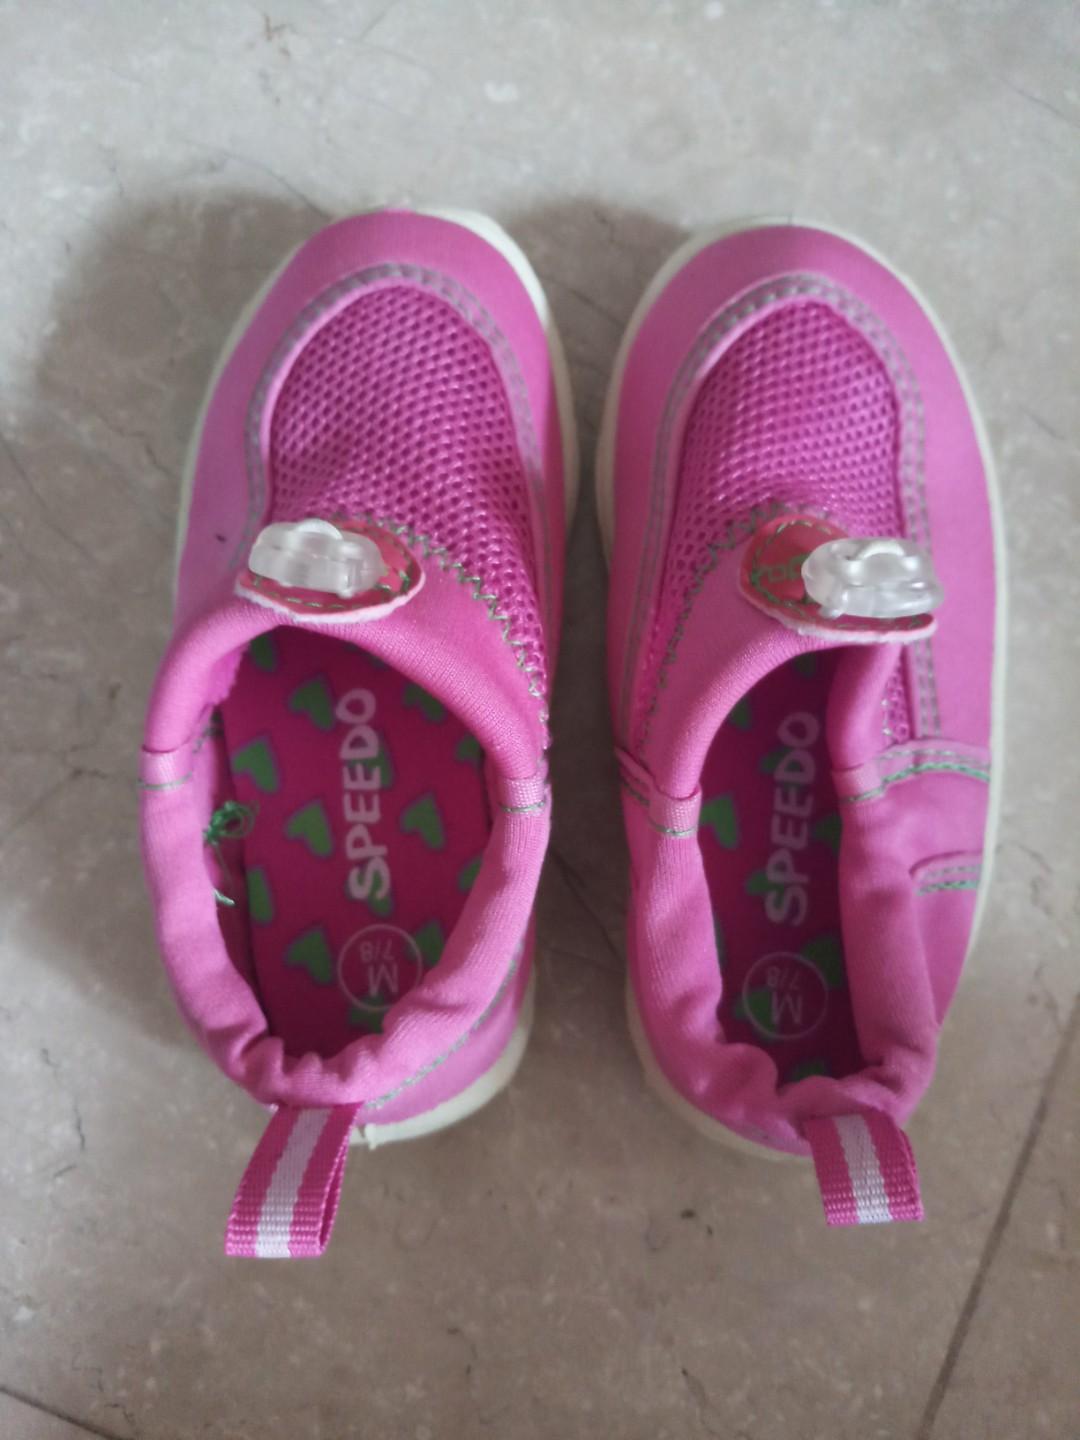 kids water shoes